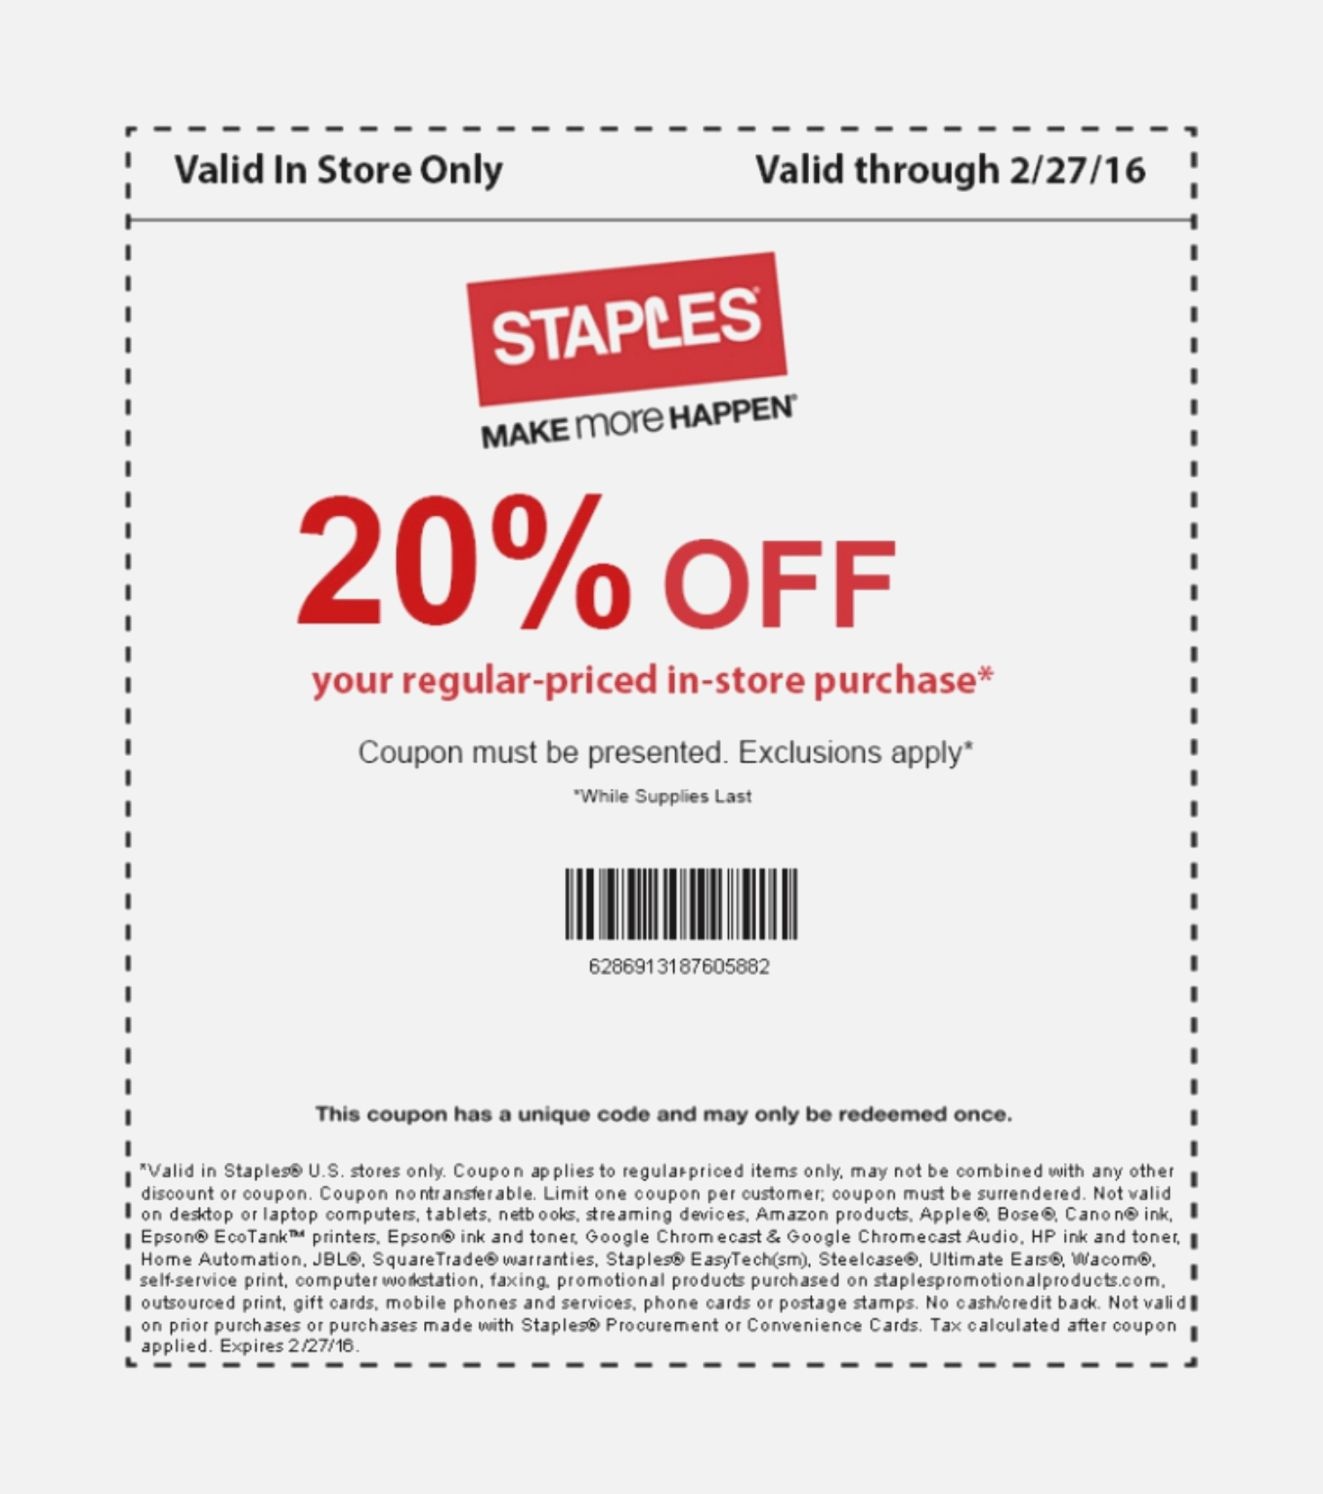 Adaptable Staples Printable Coupons | Jeettp - Free ...